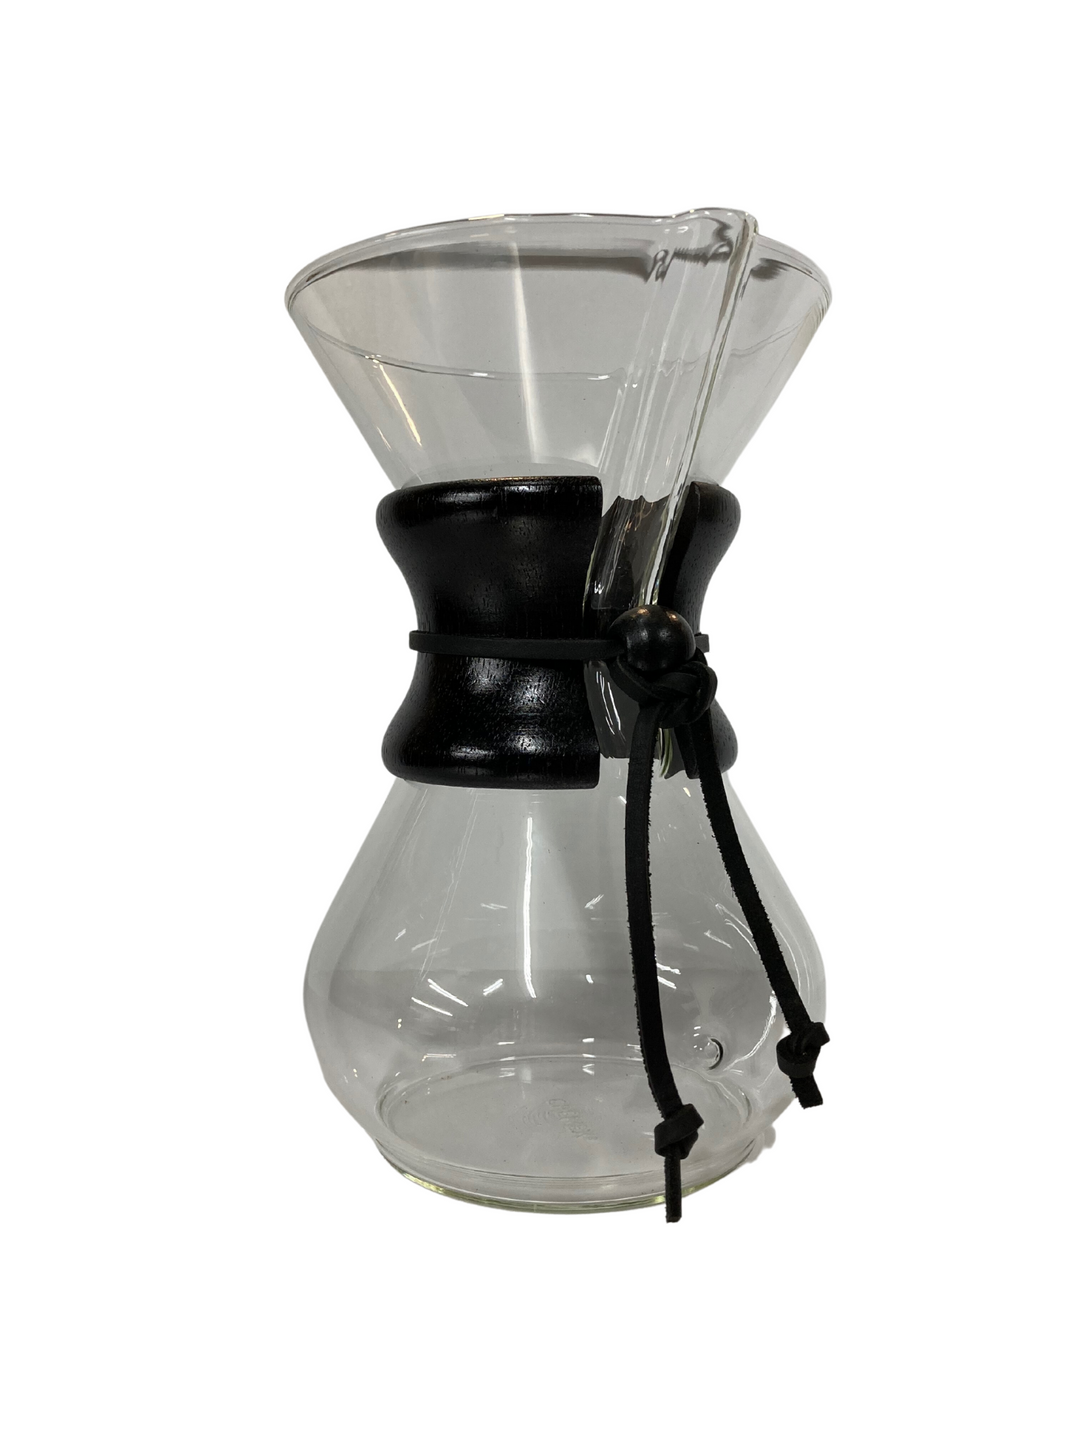 https://cdn.shopify.com/s/files/1/0566/9889/6560/files/limiteded.pourover.png?v=1683725091&width=1080